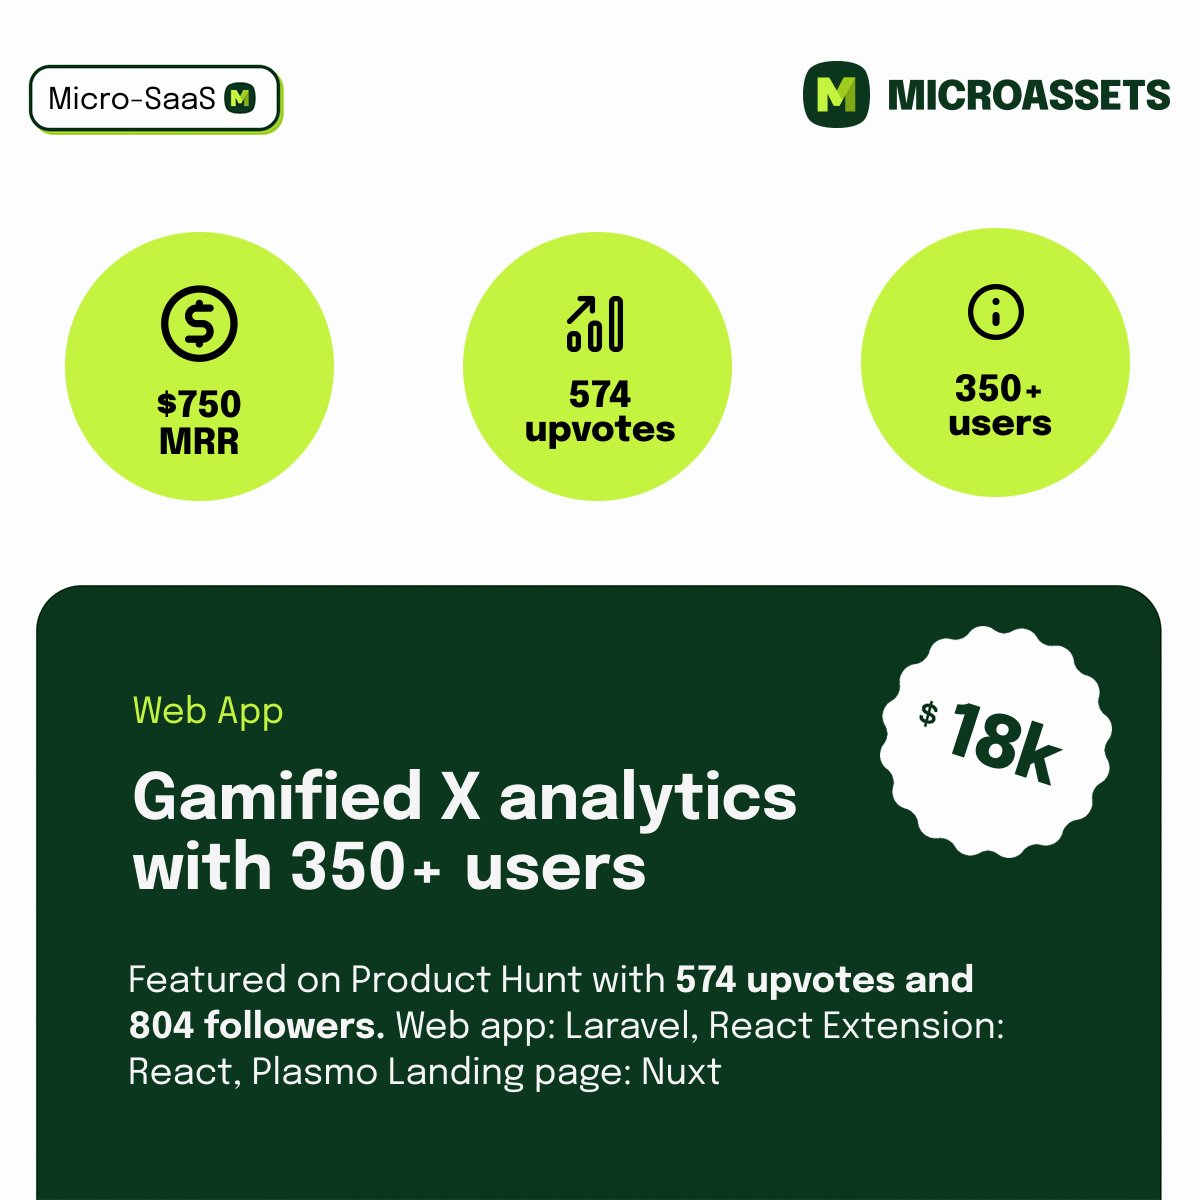 🔥 New Micro-SaaS for sale 🔥 Gamified X analytics web app with 350+ registered users and featured on Product Hunt. Revenue: $750 MRR Asking price: $18k Details: see below